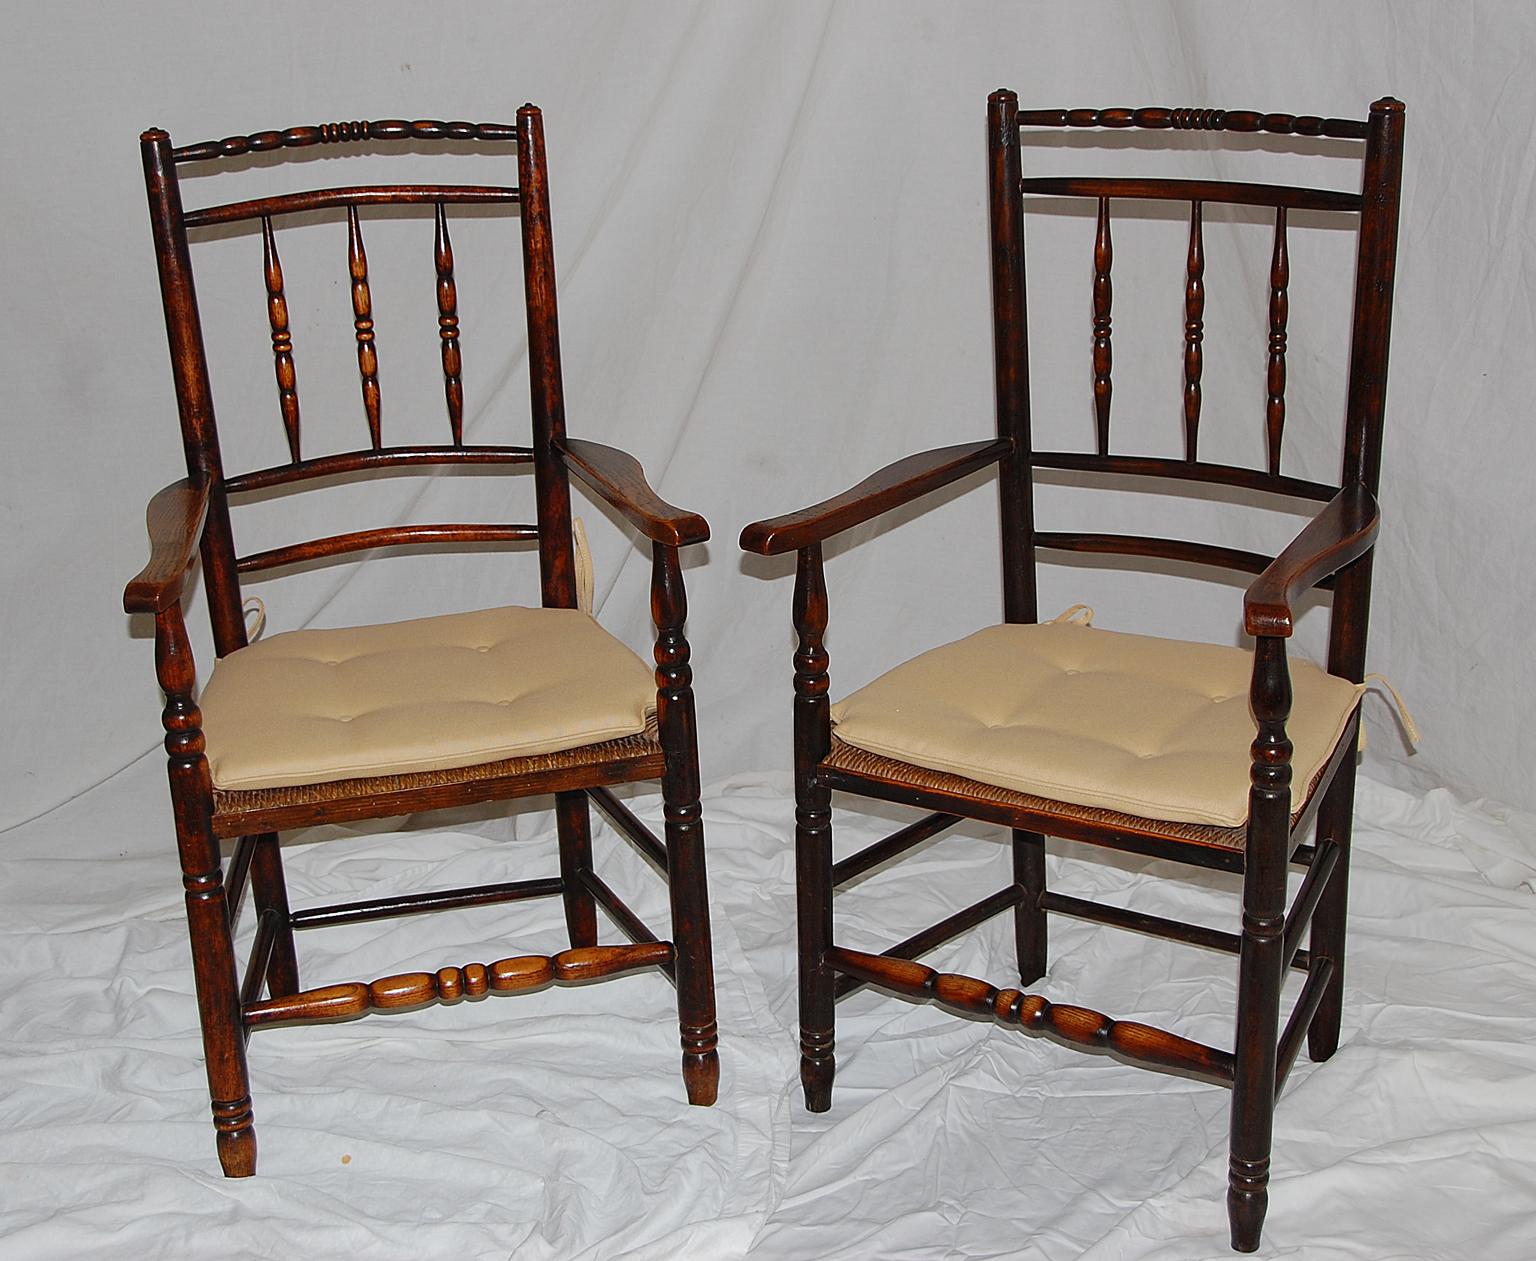 English mid-19th century set of eight Dales Lancashire spindle back dining chairs, including two arms and six side chairs. There is lovely wear to the curved top rails of these chairs, the turned double box stretchers provide strength. These chairs